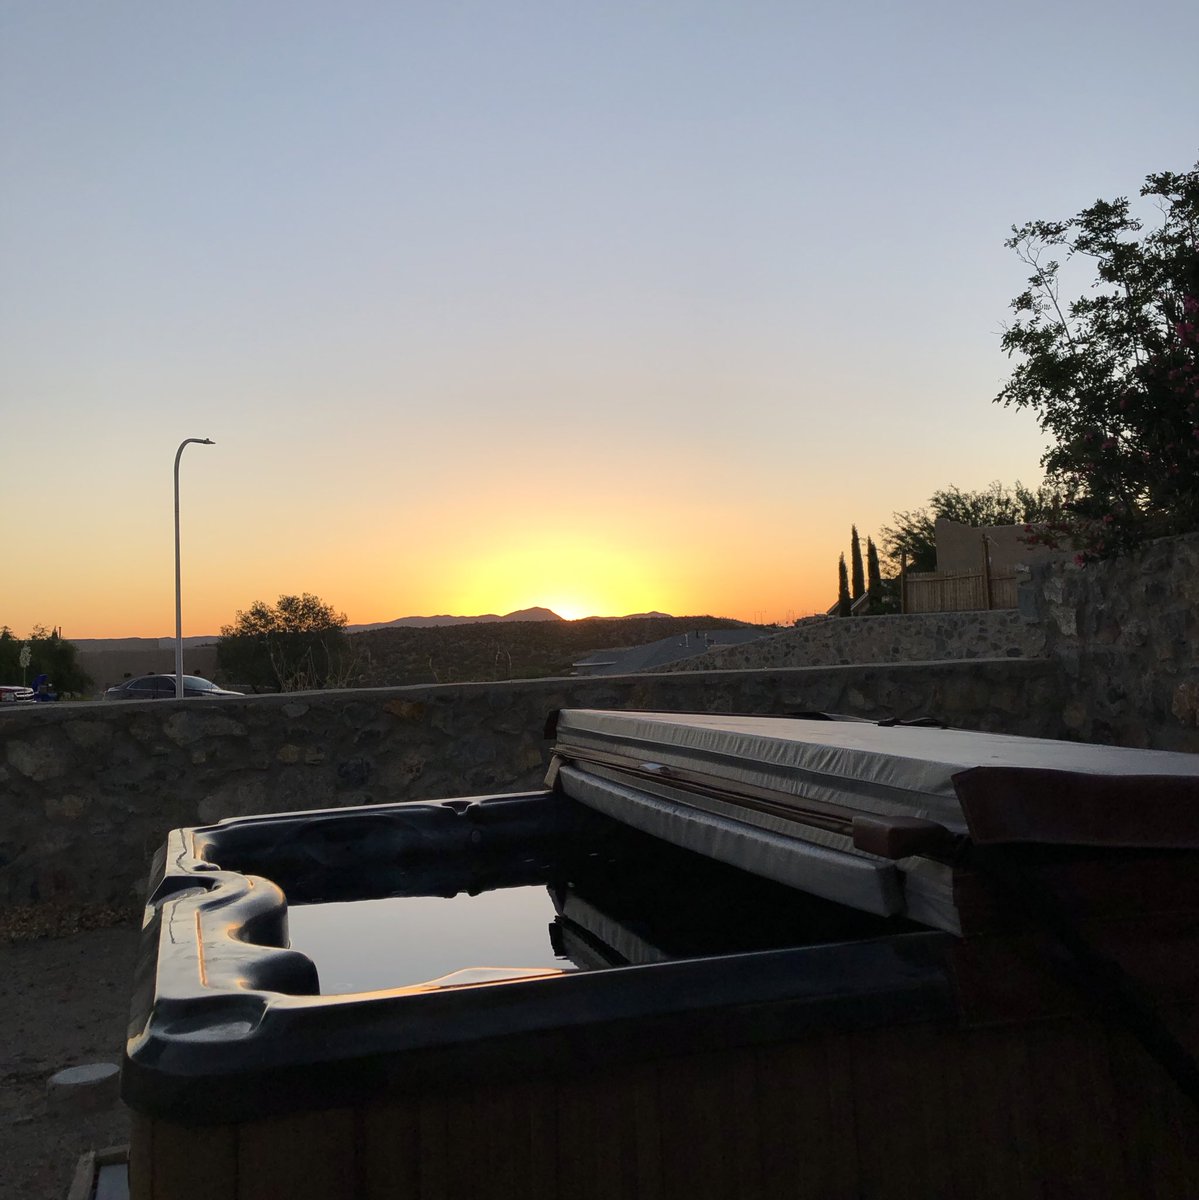 New Mexico. Hot tub. Sunset. What else do you need to know?